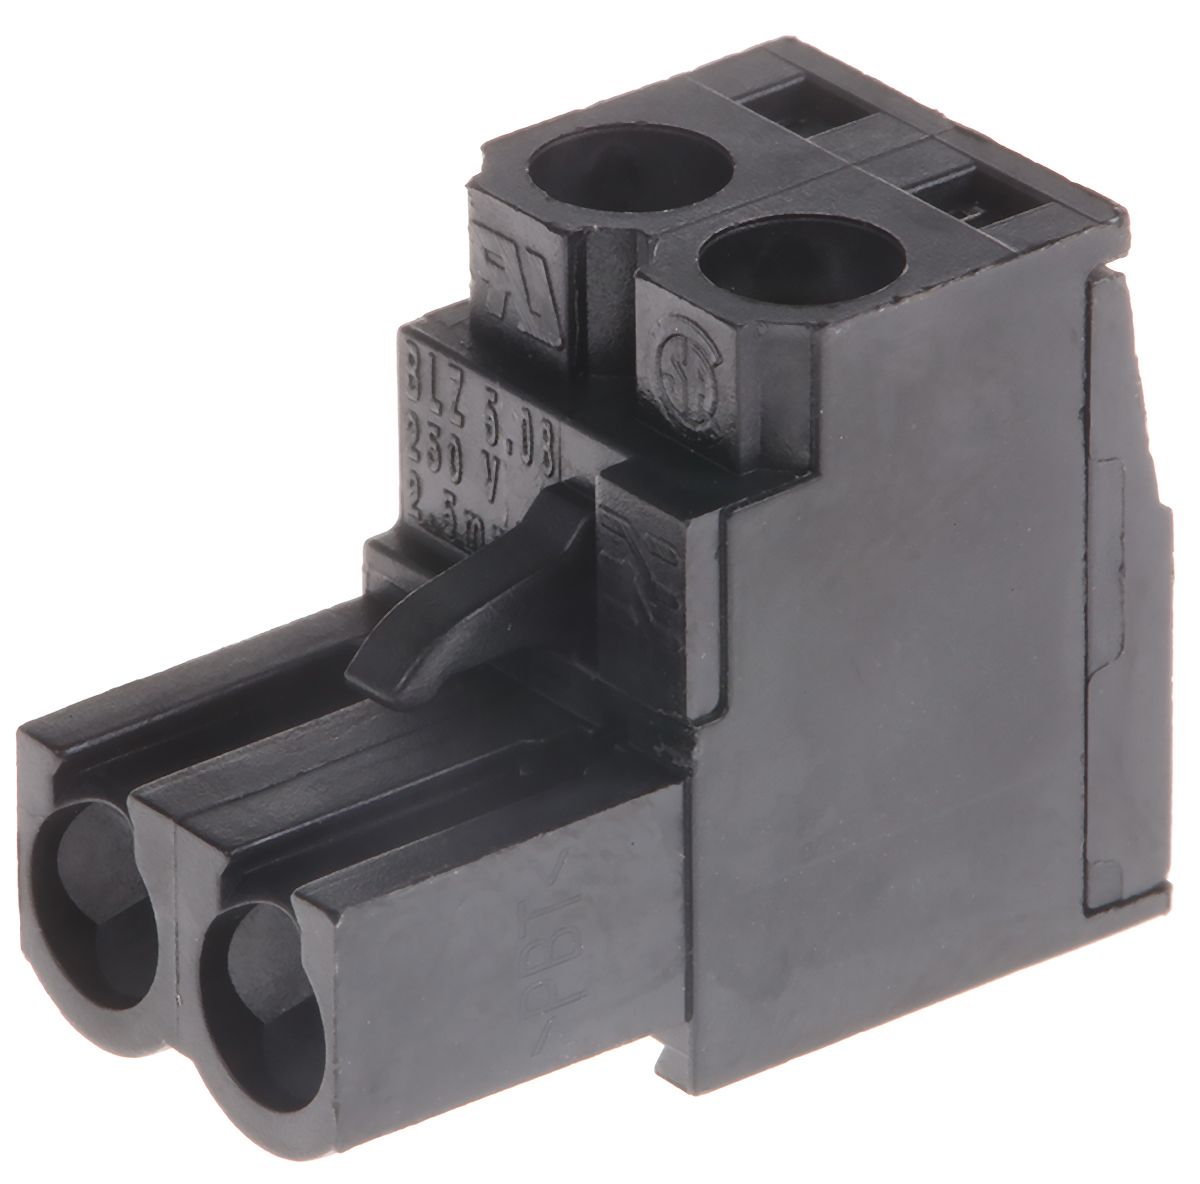 Weidmuller BL 5.08 2-pin Pluggable Terminal Block, 5.08mm Pitch Rows